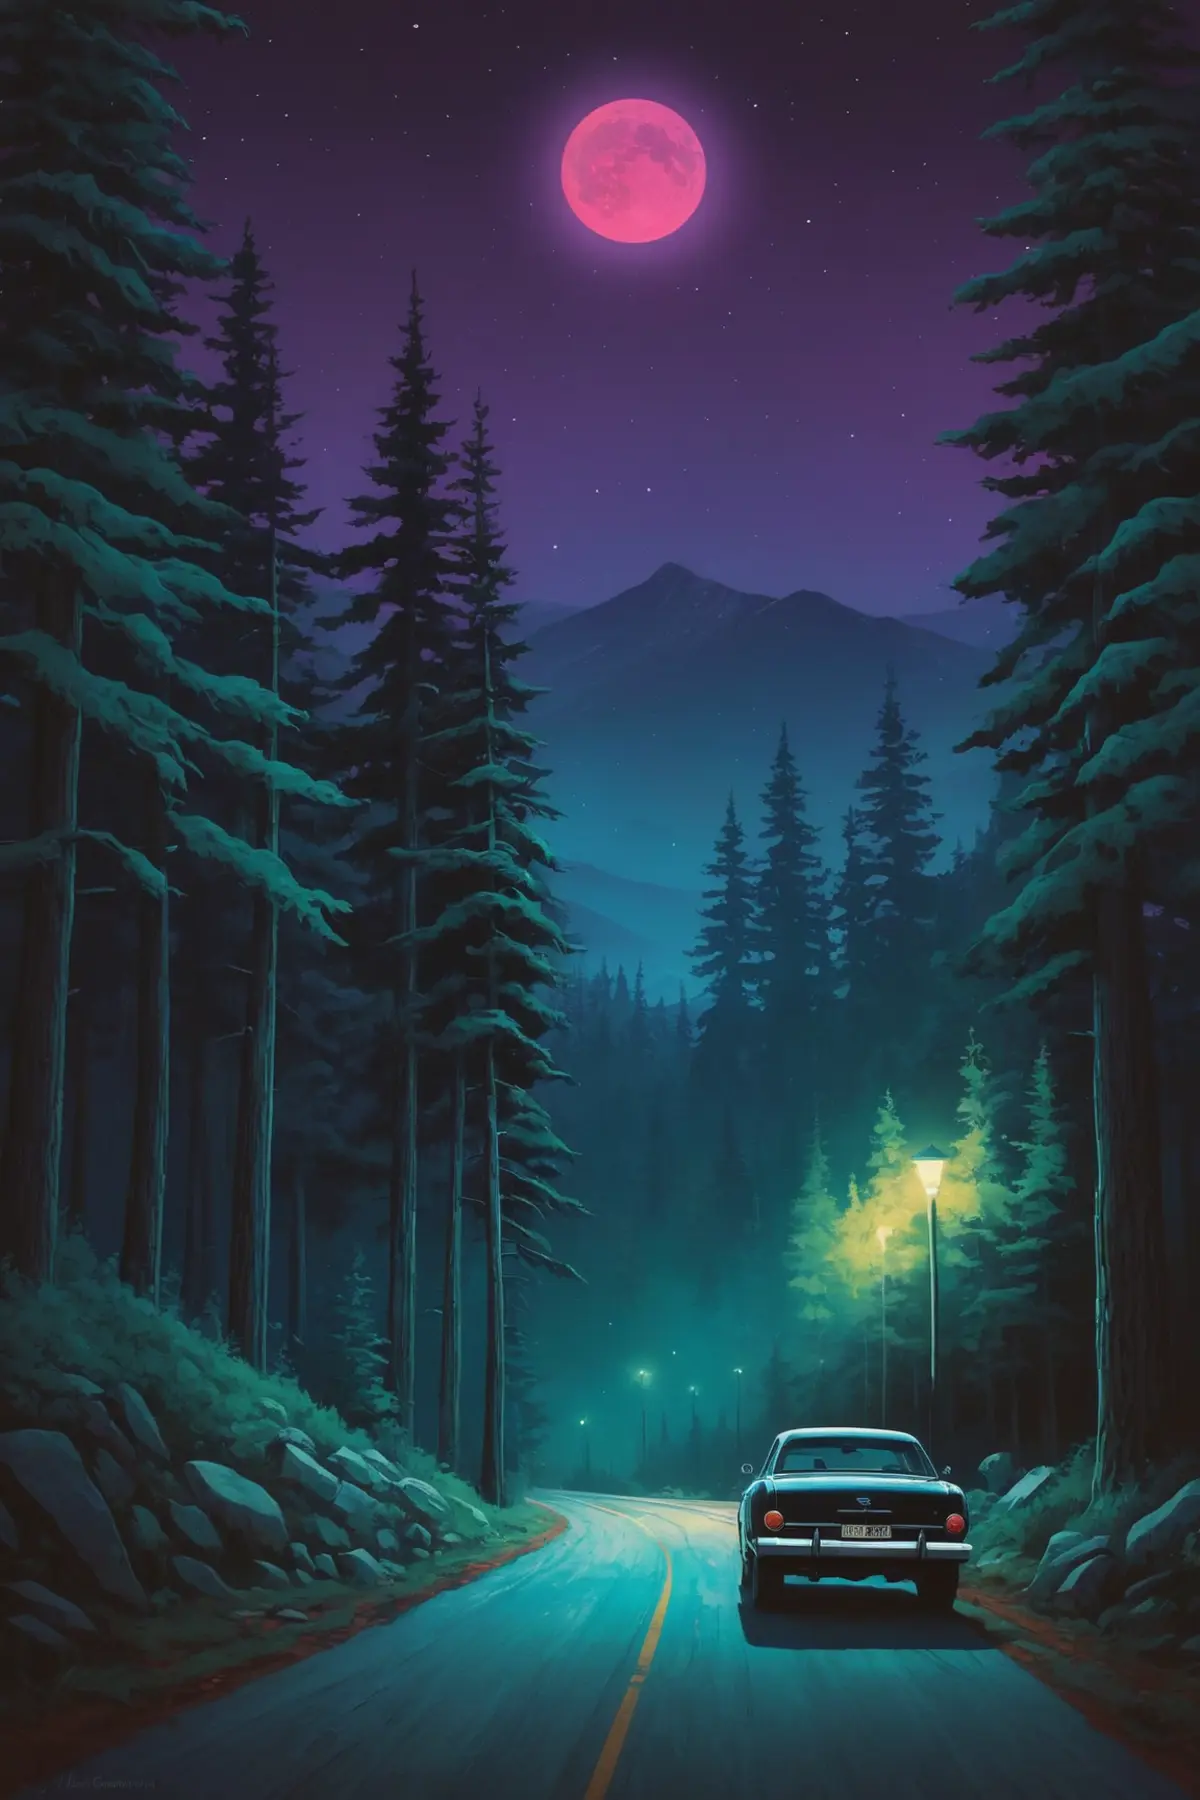 A car parked on a deserted road flanked by tall pine trees under a starry night sky. The scene is illuminated by an unusually large, crimson moon, and the road is lit by yellow streetlights.